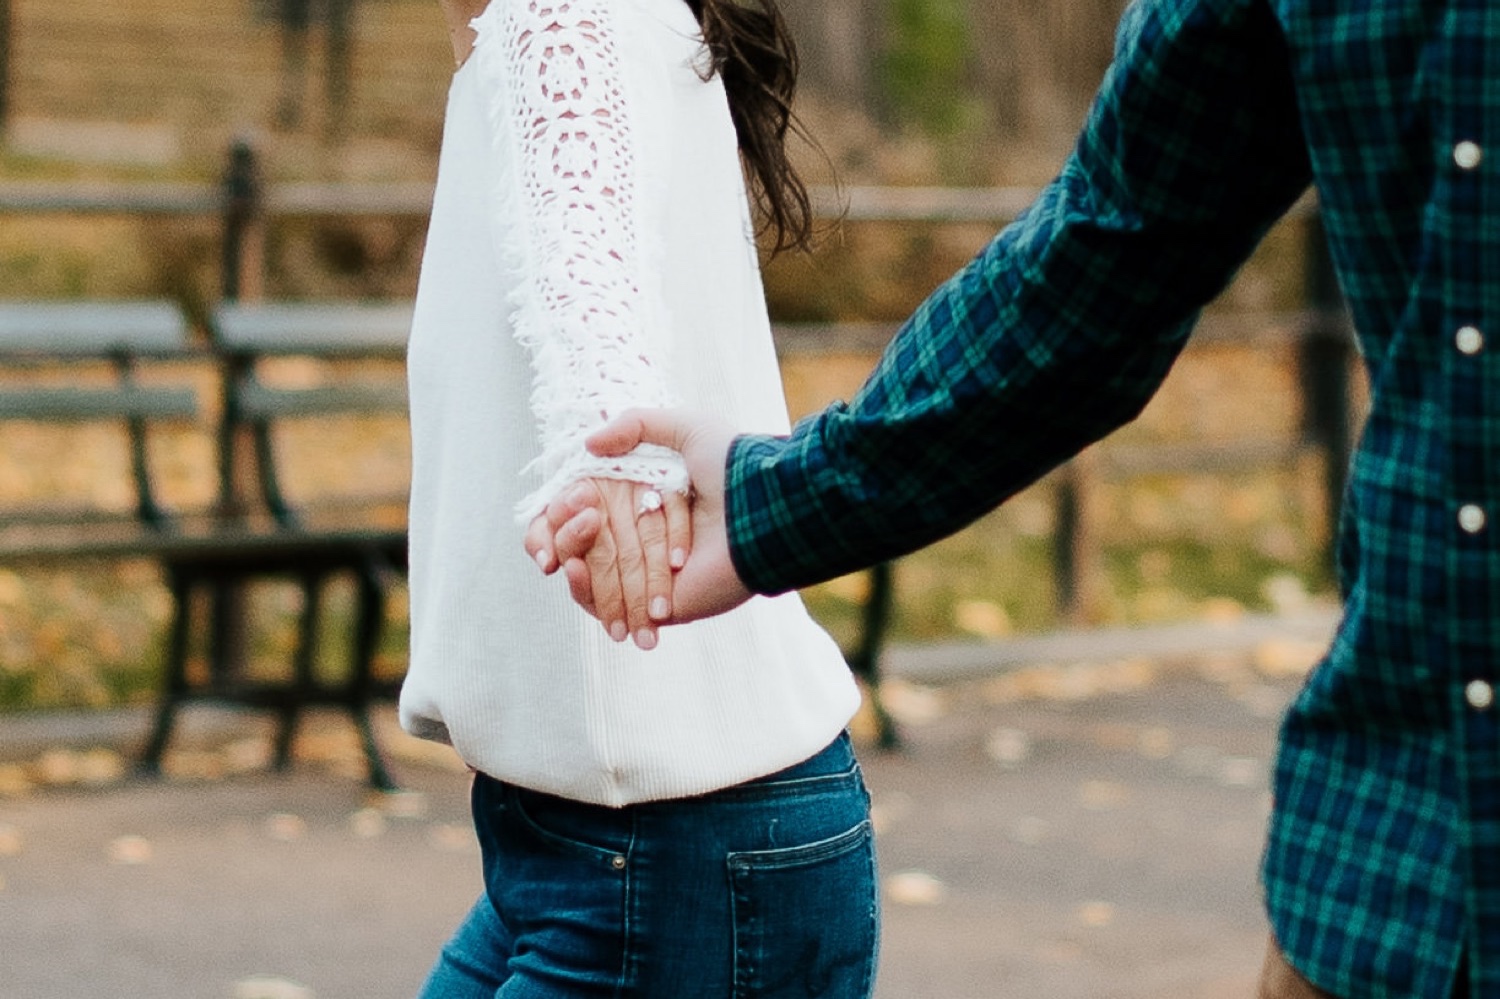 engaged couple holds hands in sight of her engagement ring in central park nyc during engagement photoshoot